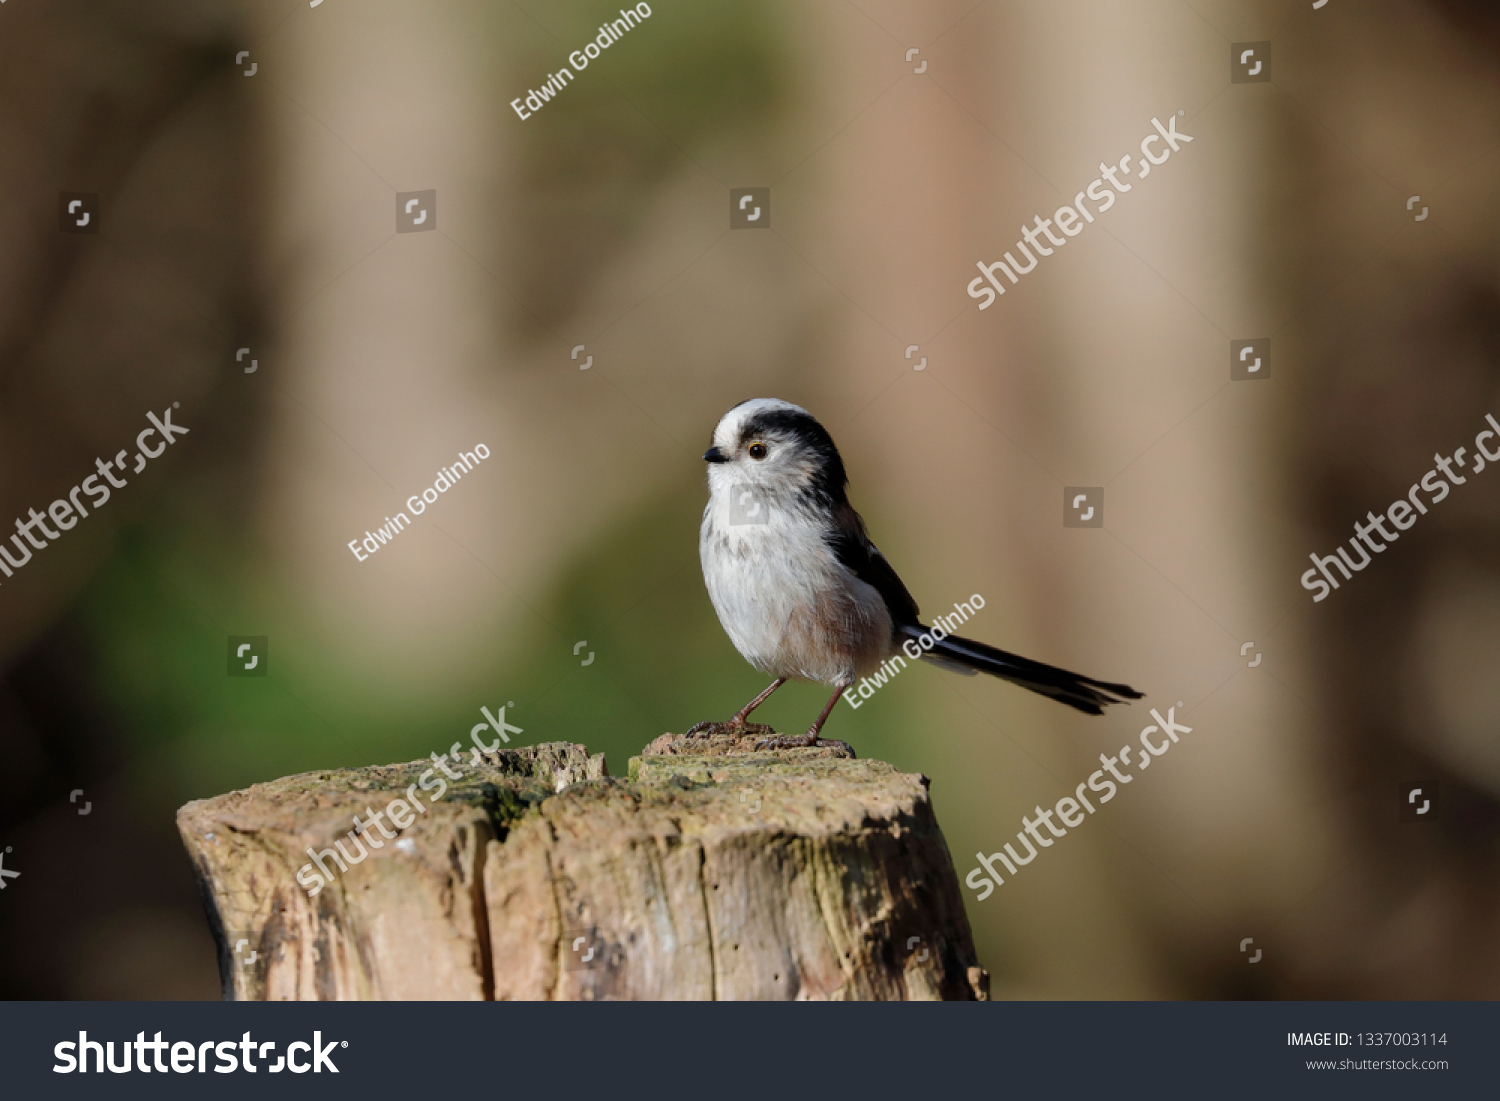 A long-tailed tit on a post #1337003114